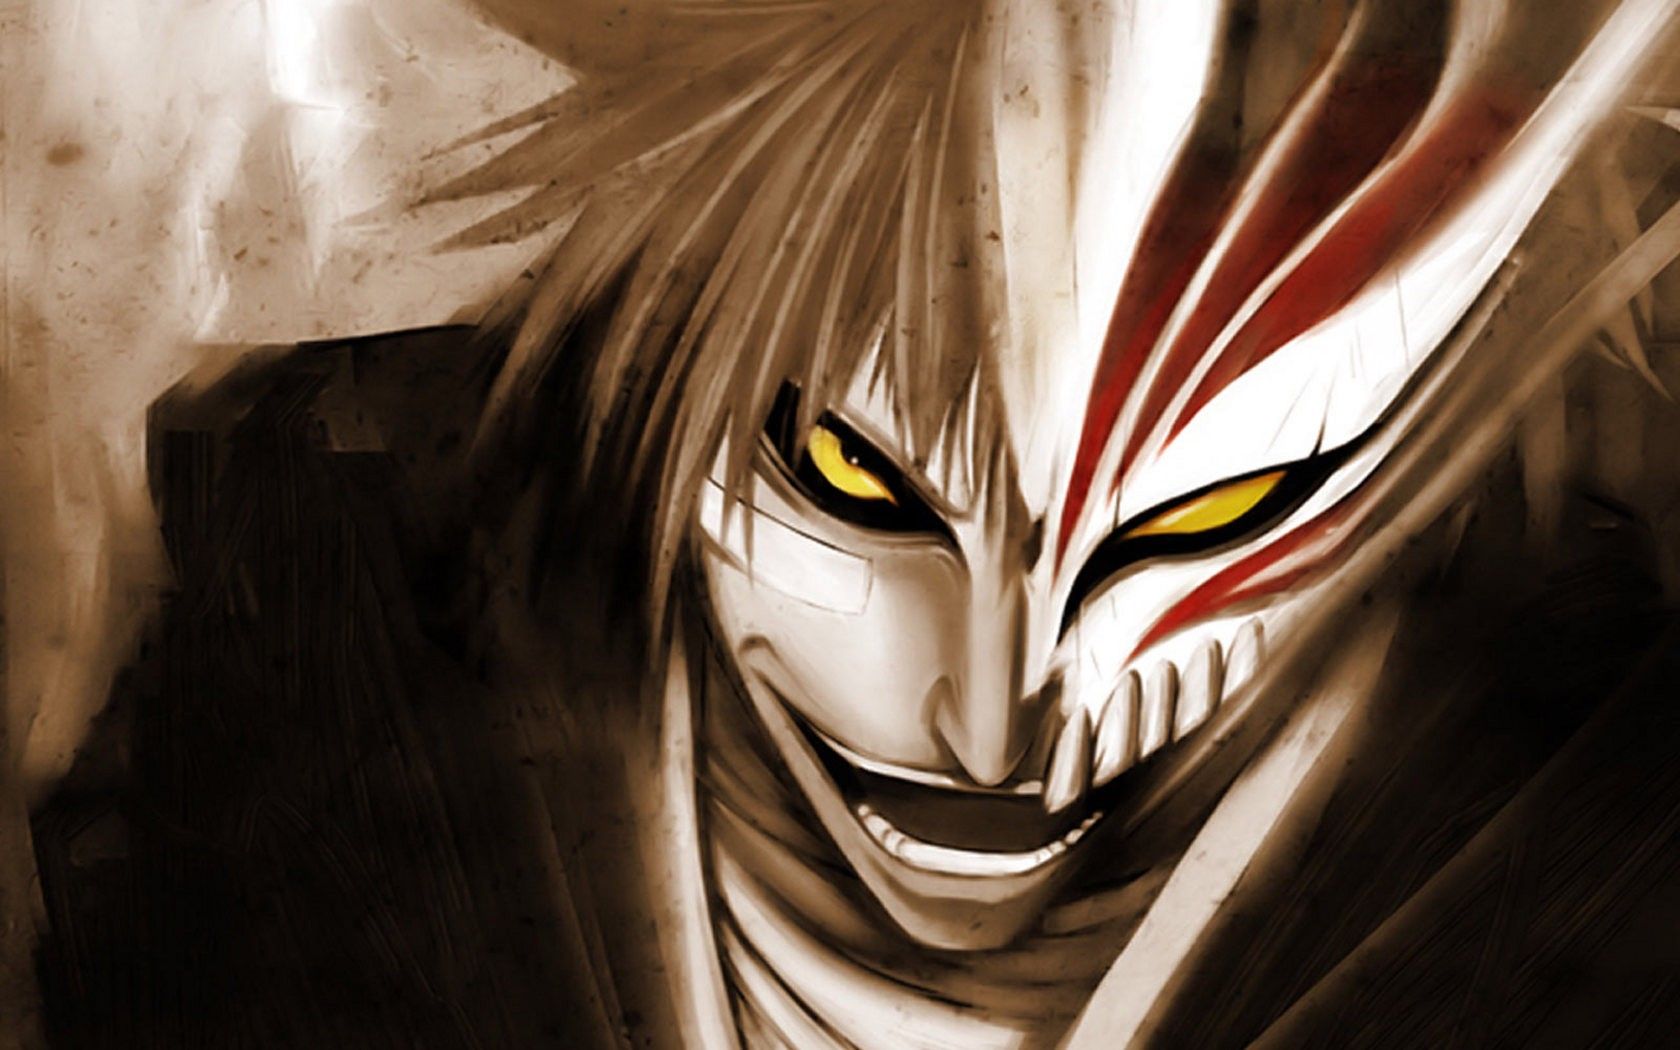 Anime With Mask Wallpaper. Cool anime wallpaper, Bleach anime